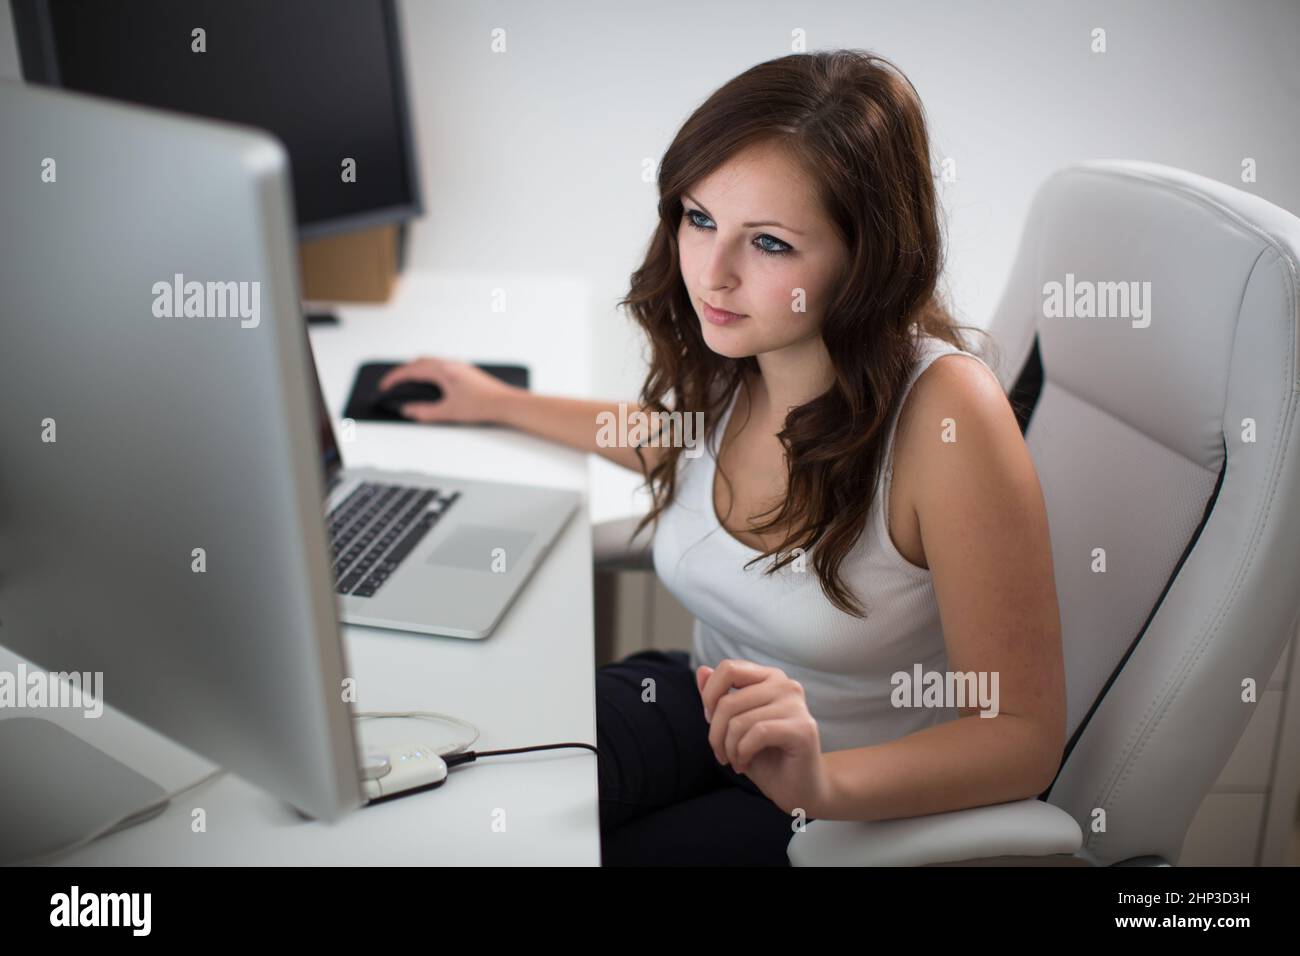 Young woman working on a computer in a home office Stock Photo